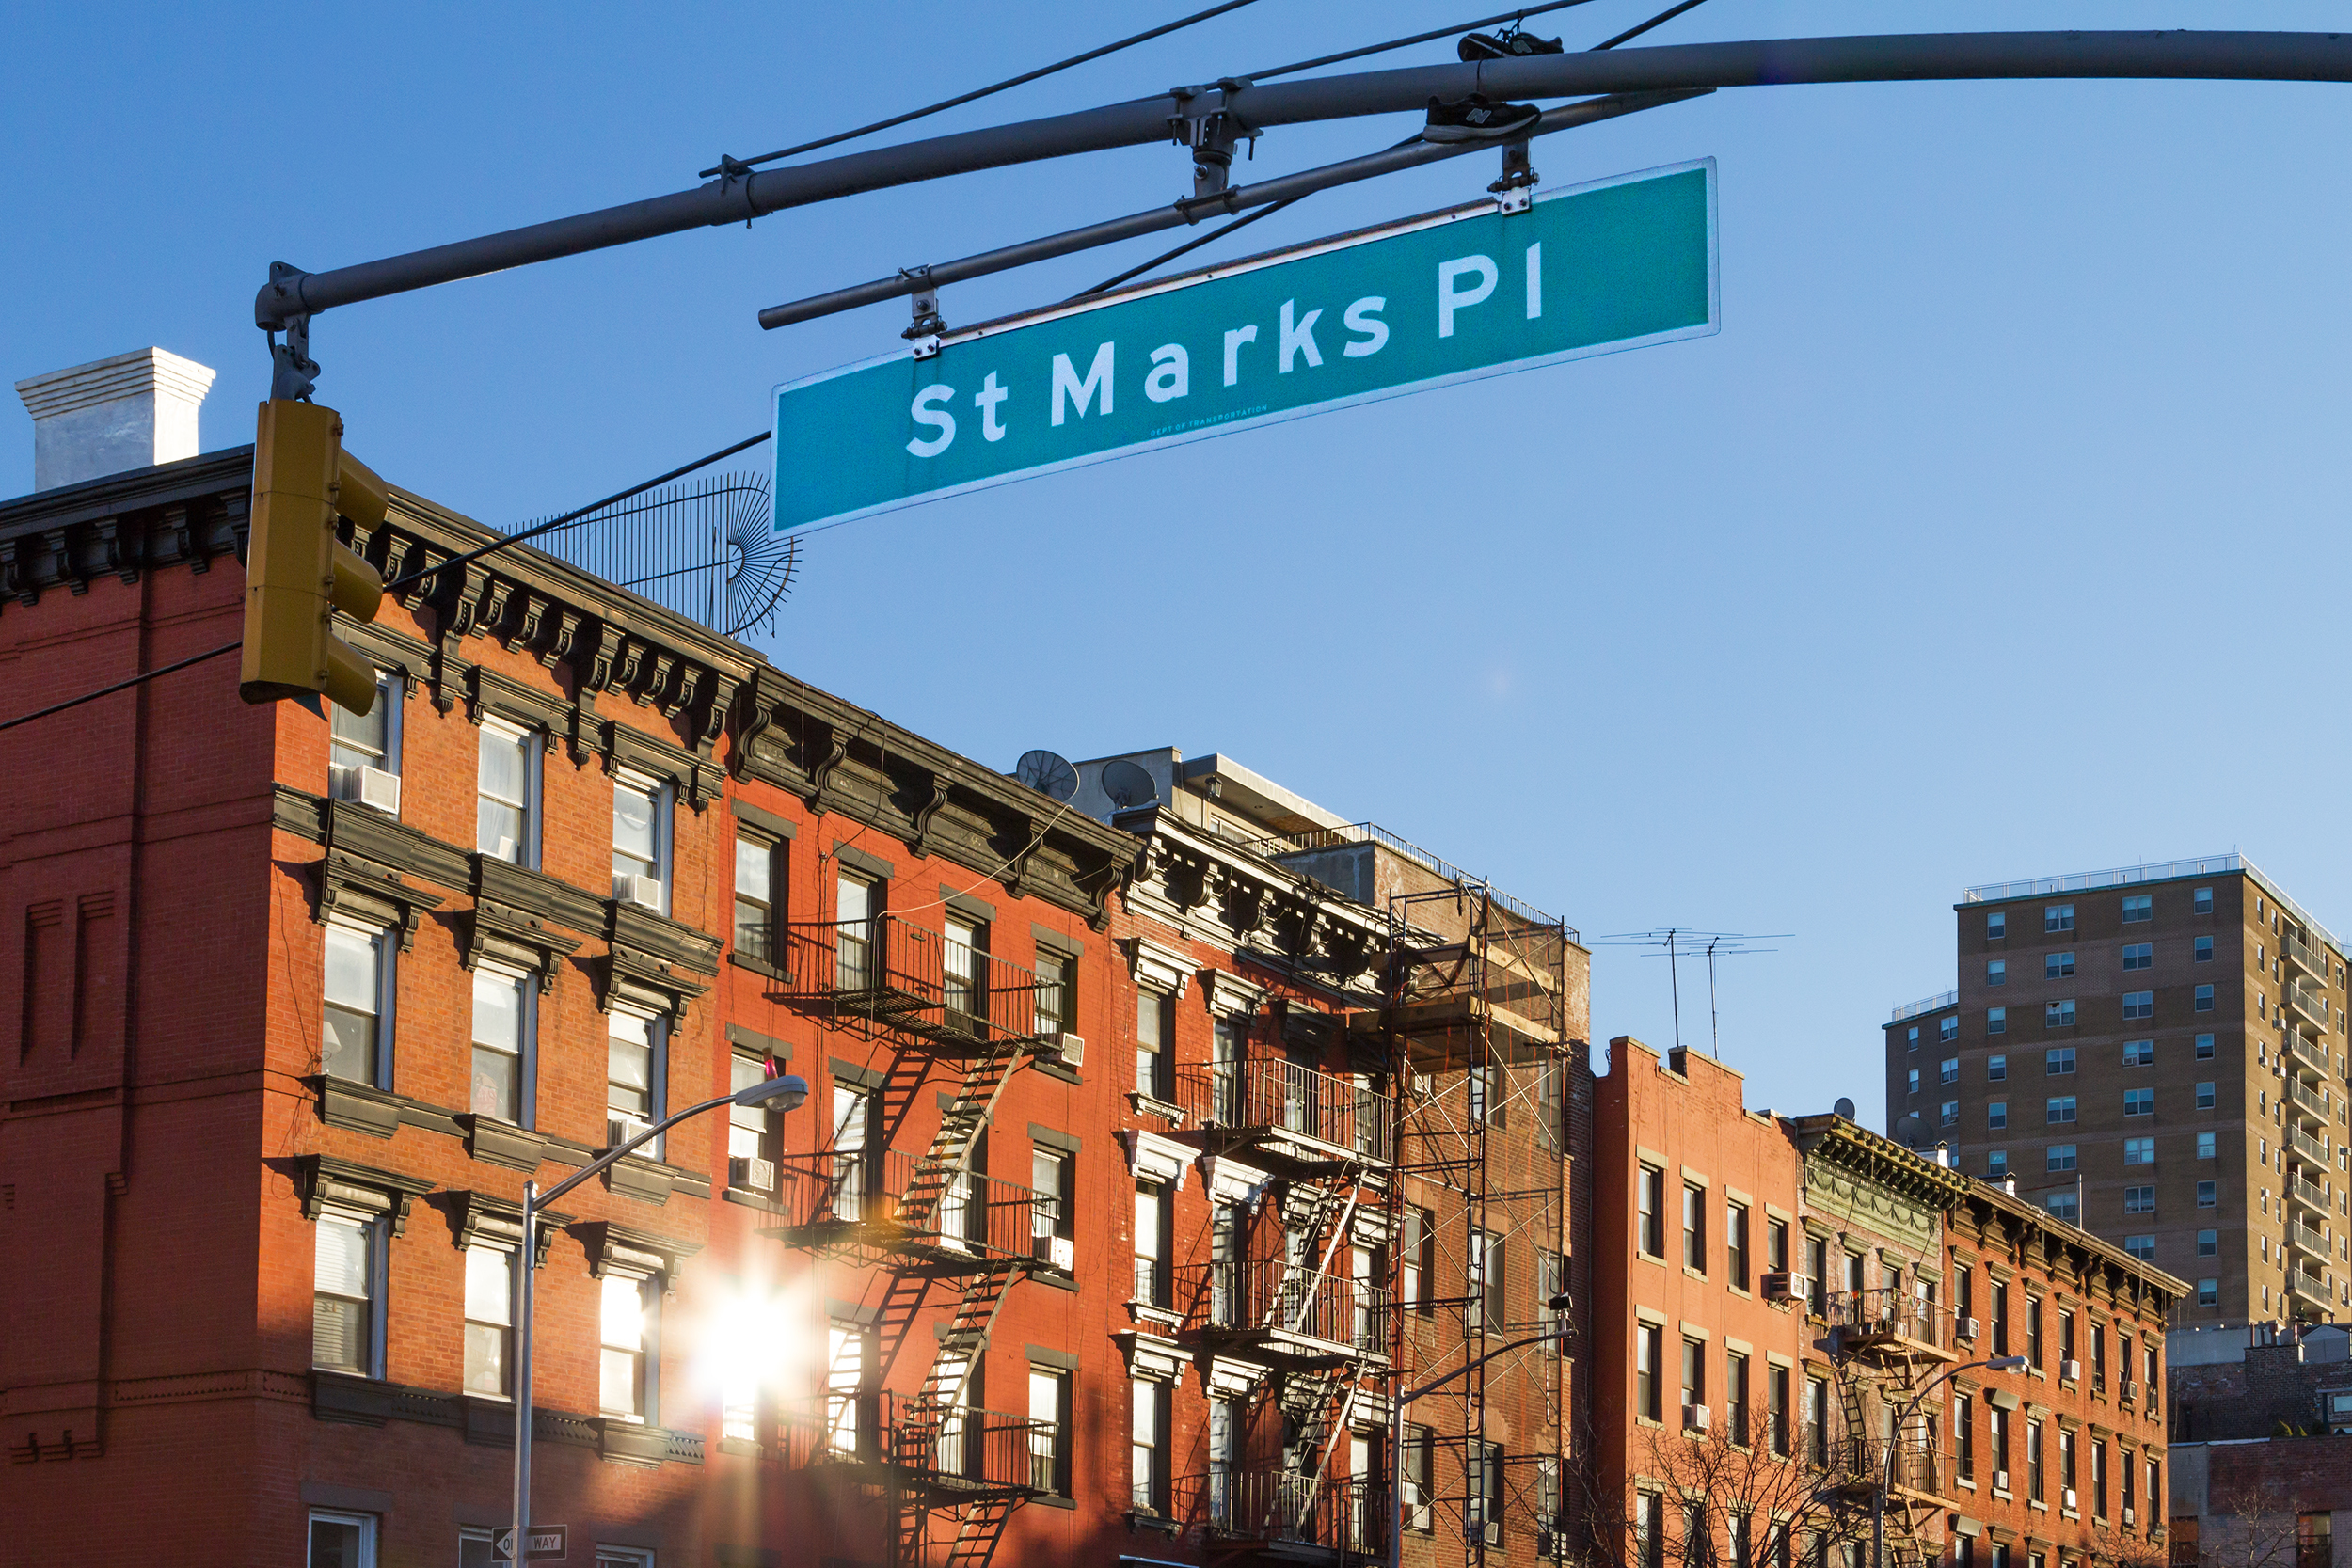 St Marks Place | New York City, USA Attractions - Lonely Planet